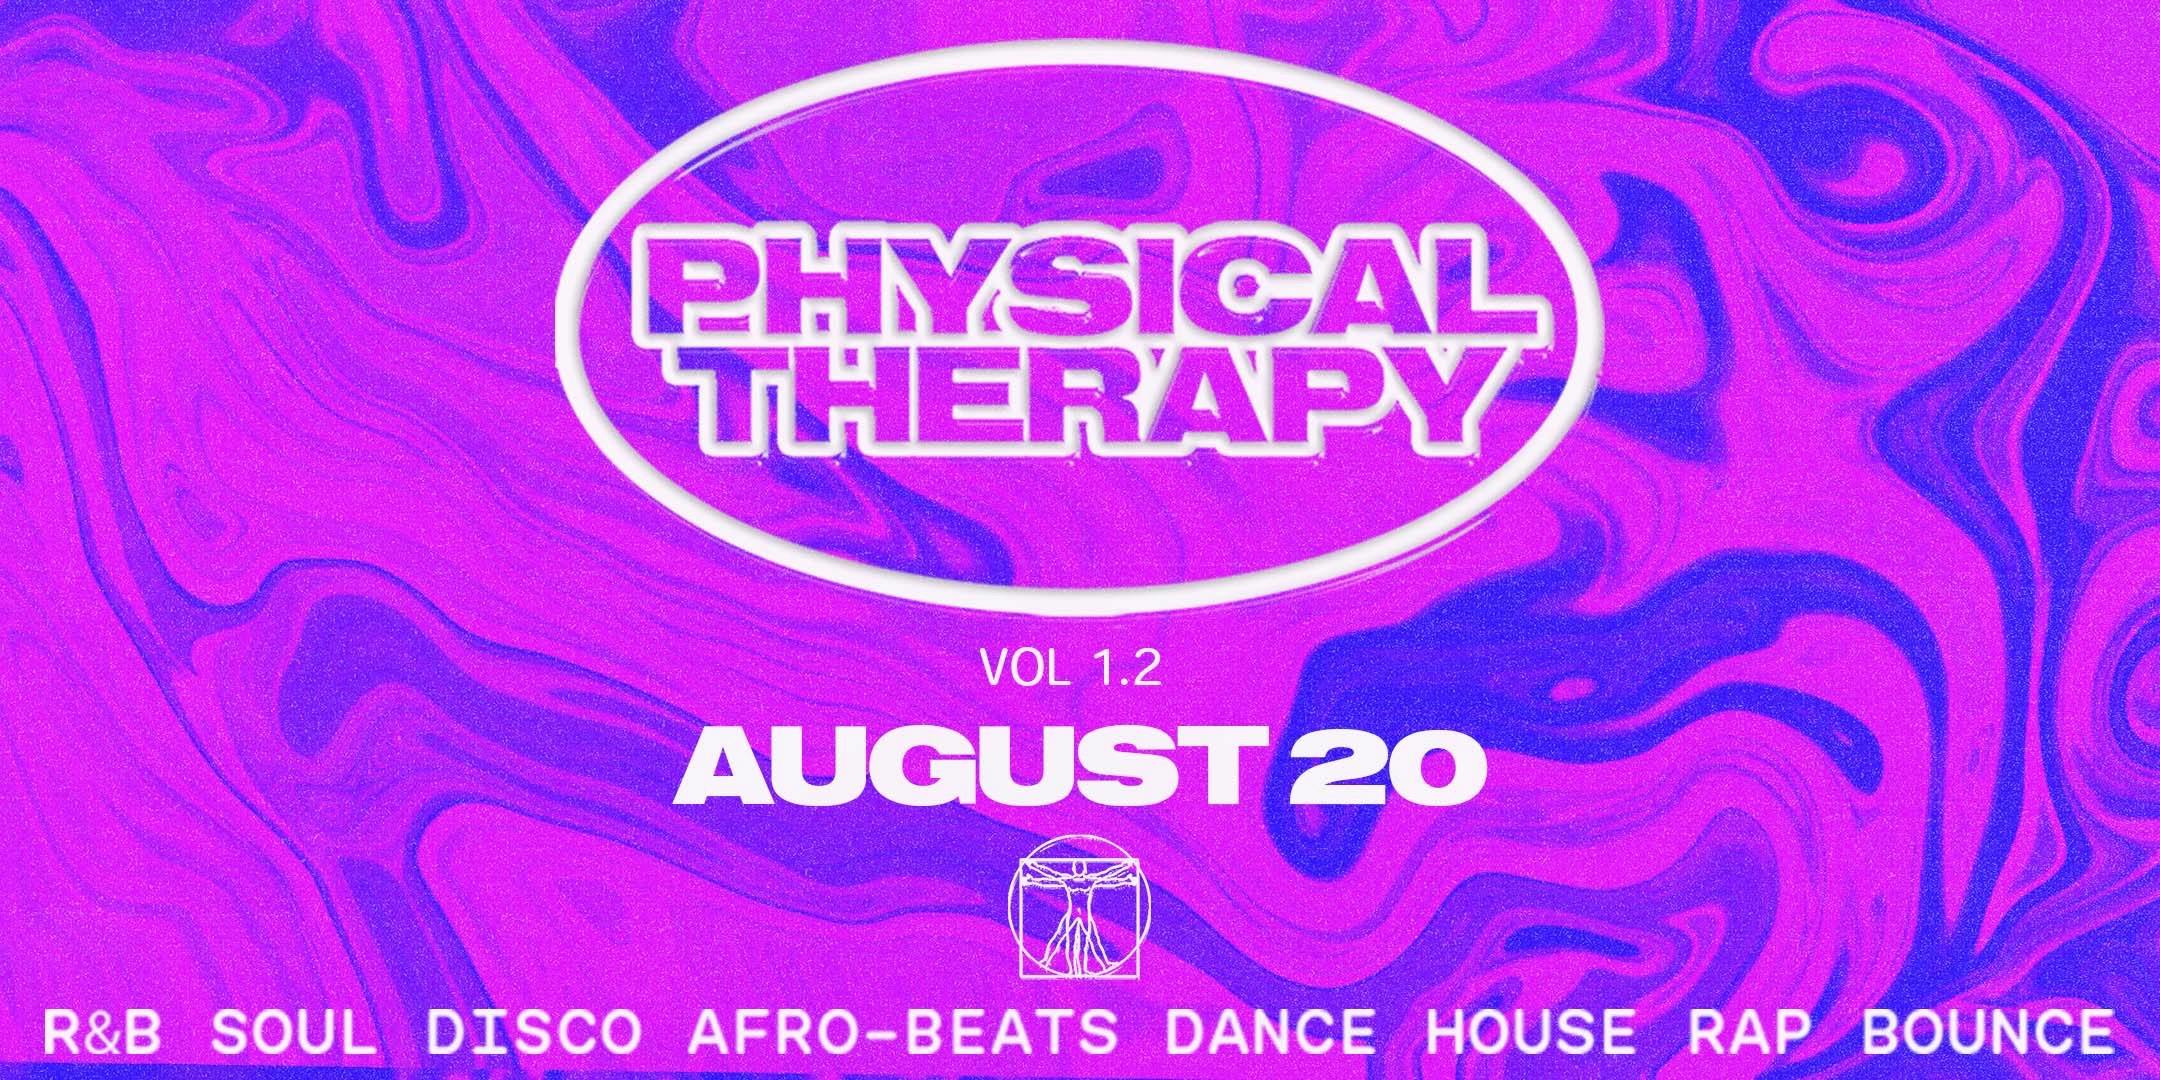 PHYSICAL THERAPY VOL 1.2